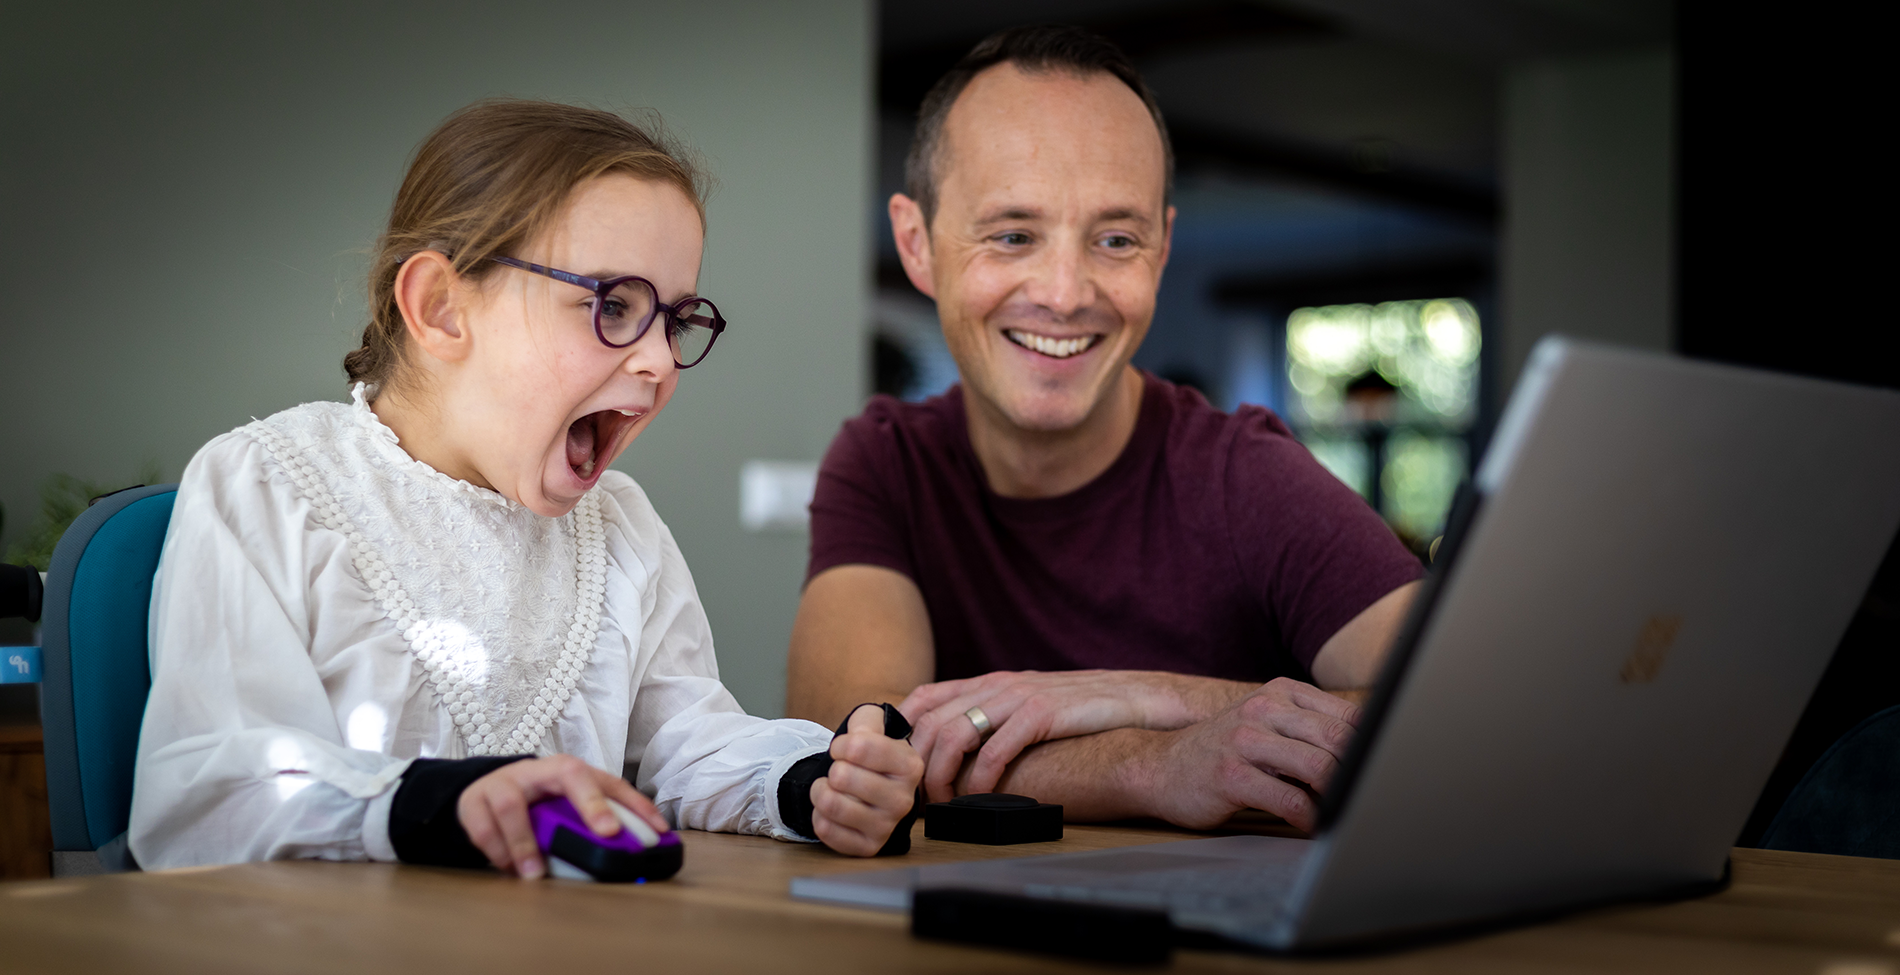 Little girl with CP using an adaptive mouse happily. Her father smiles next to her.